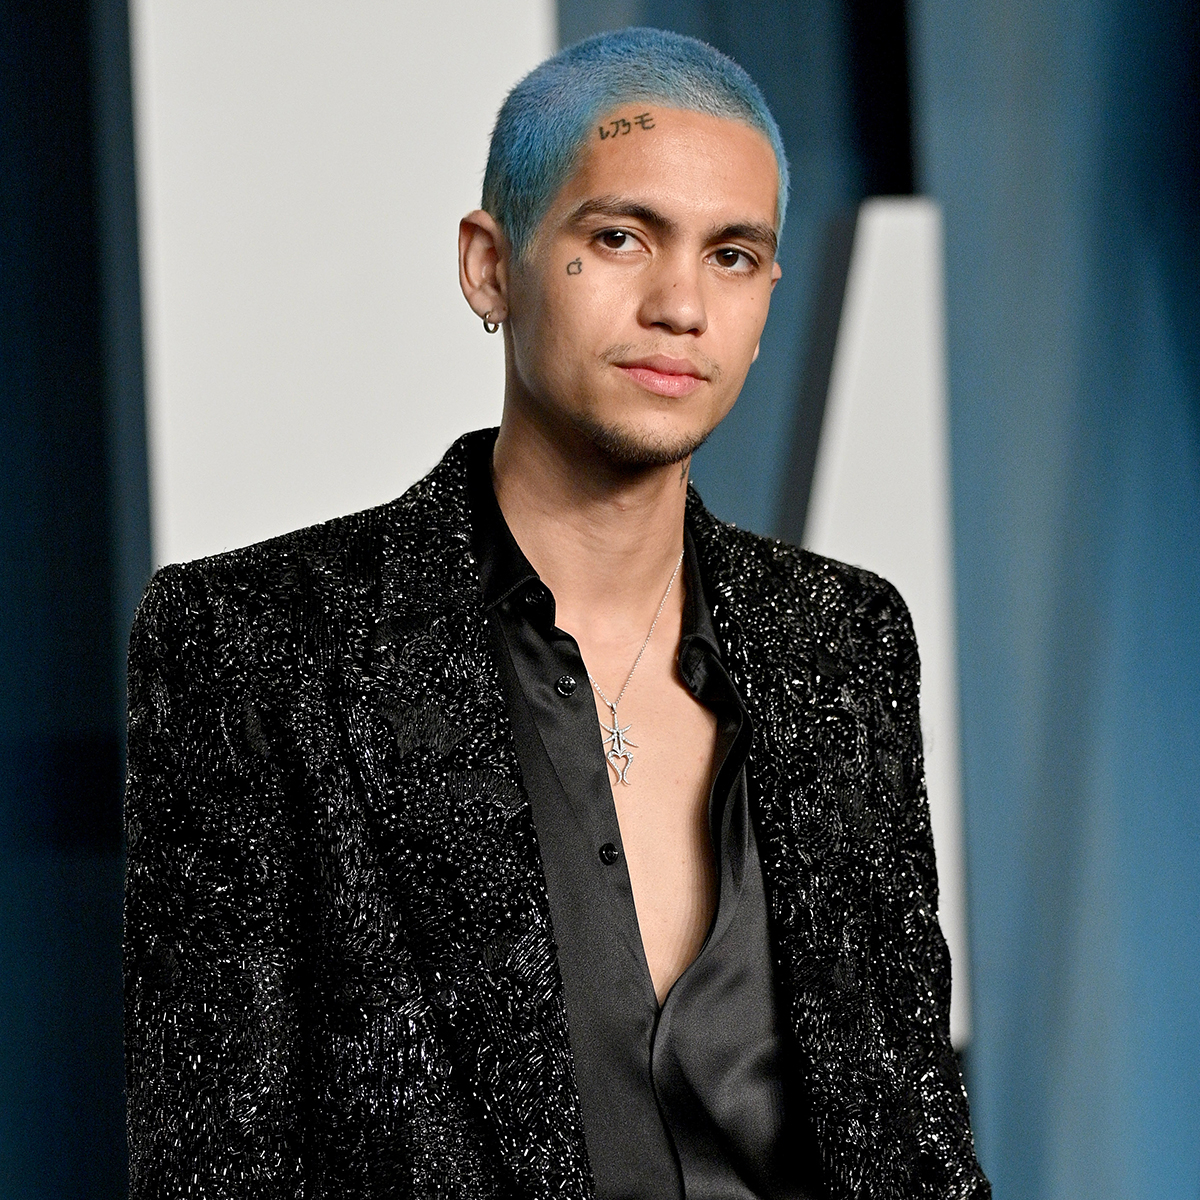 Euphoria's Dominic Fike Booed Over Comments About Amber Heard